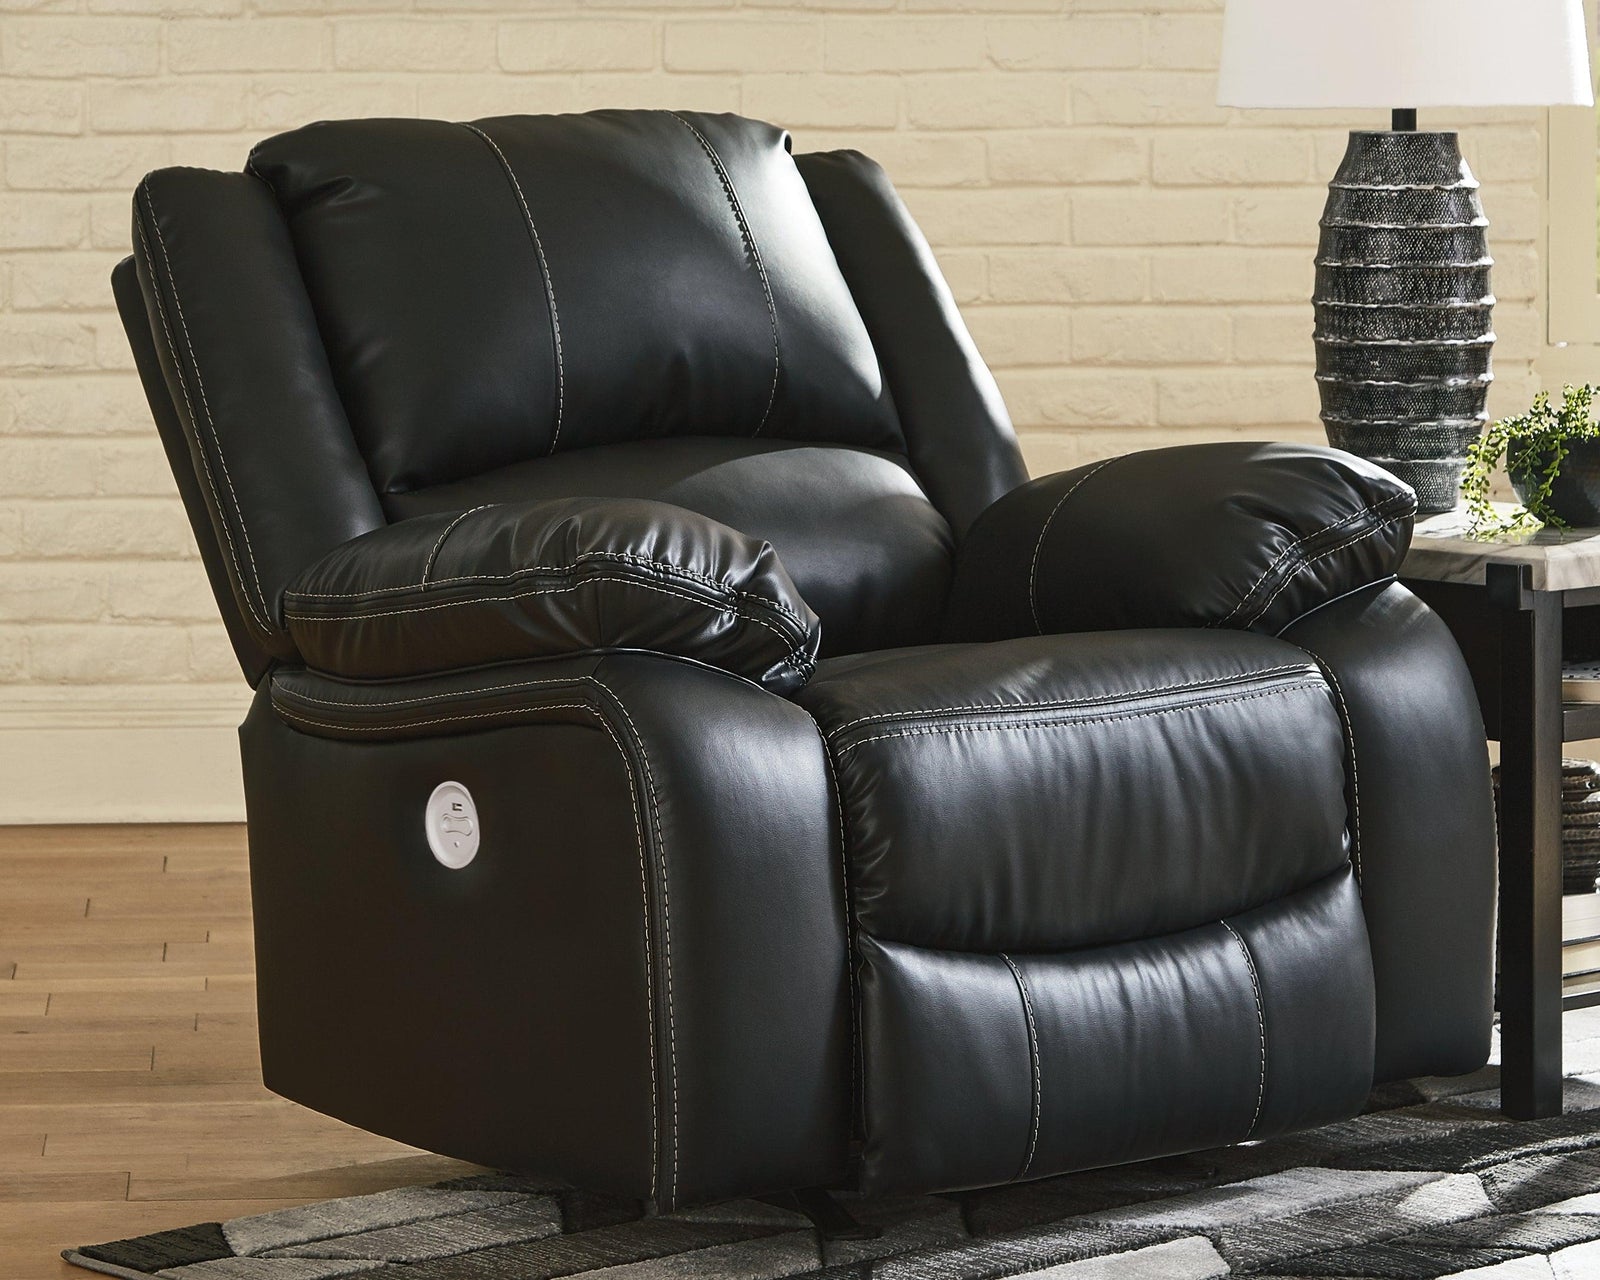 Calderwell Black Faux Leather Power Recliner